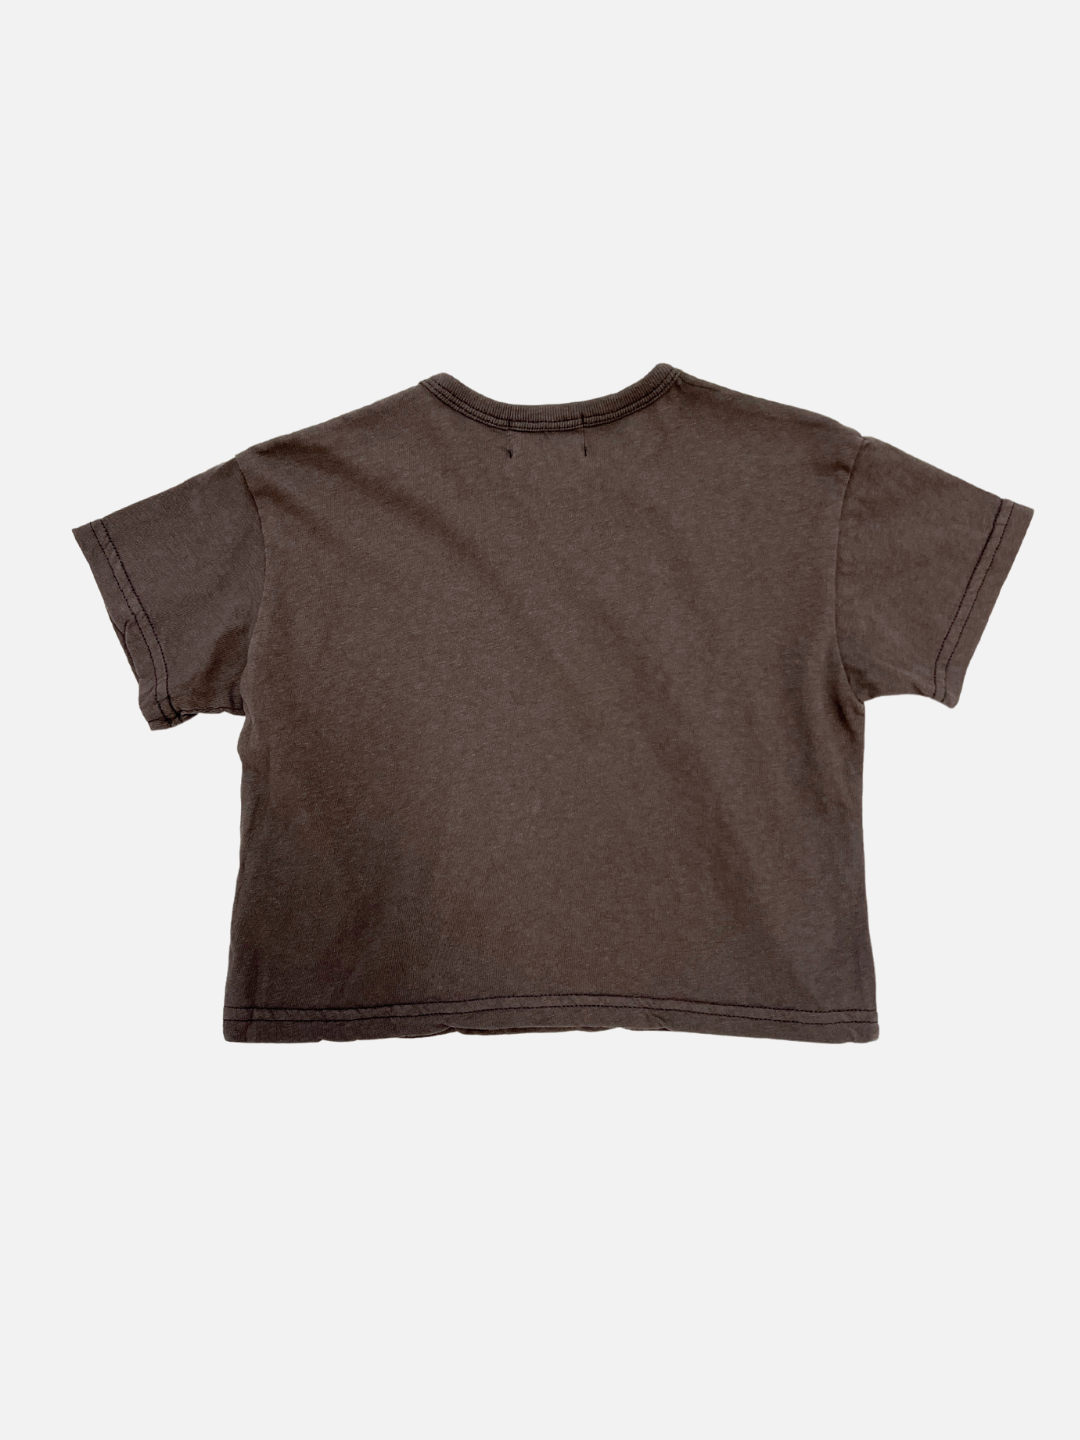 Charcoal | Back view of the kid's Studio tee in charcoal